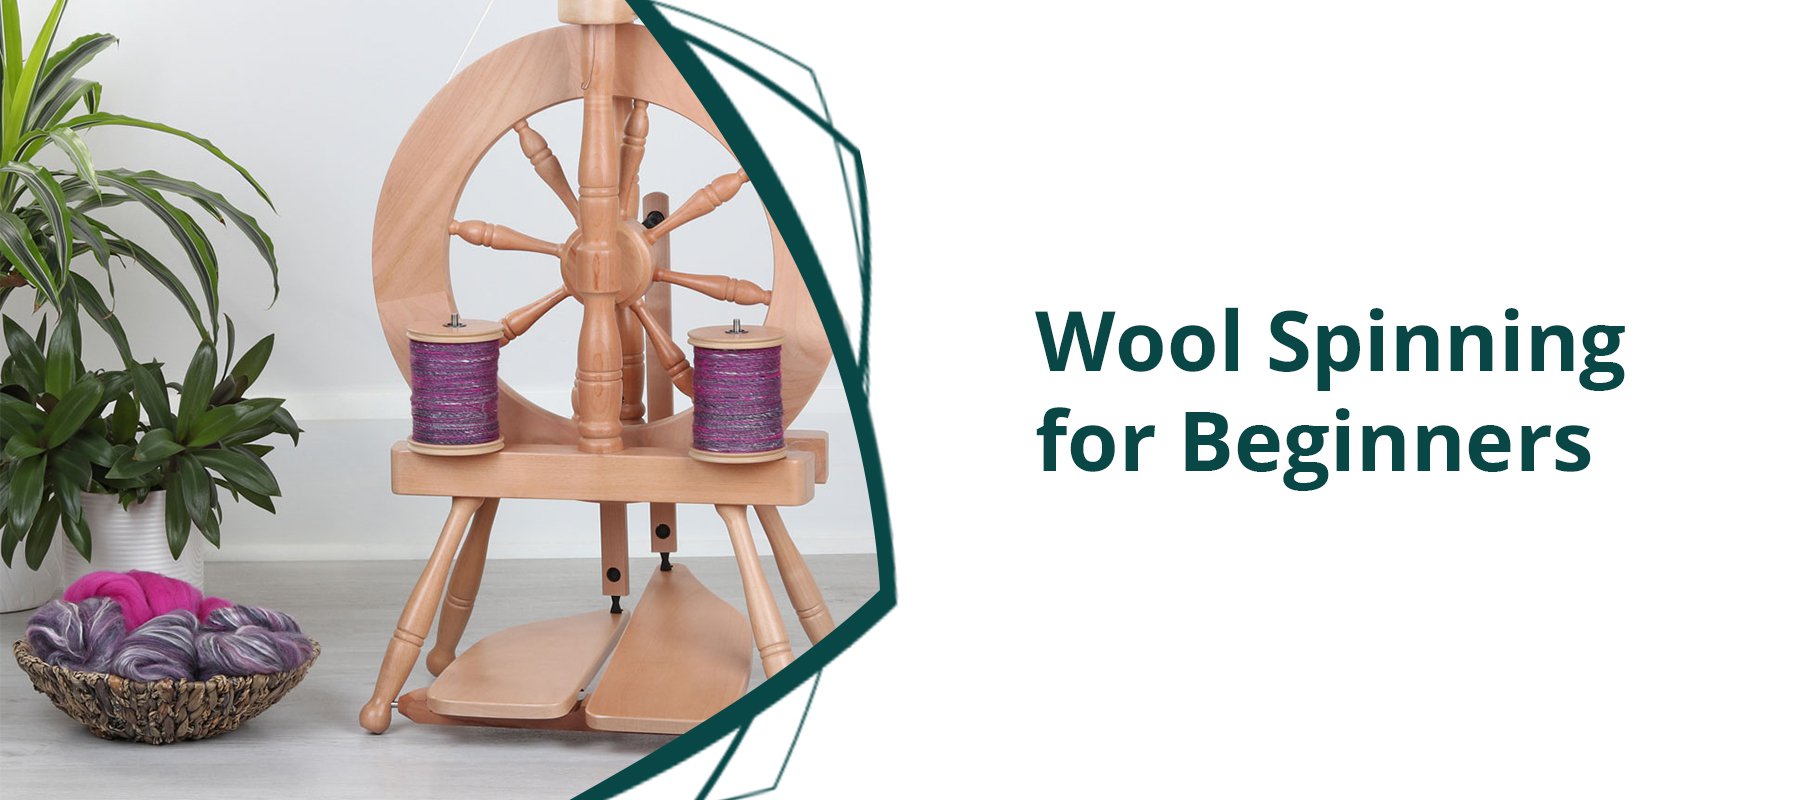 Choose Your Tools - How to Start Spinning Wool for Beginners